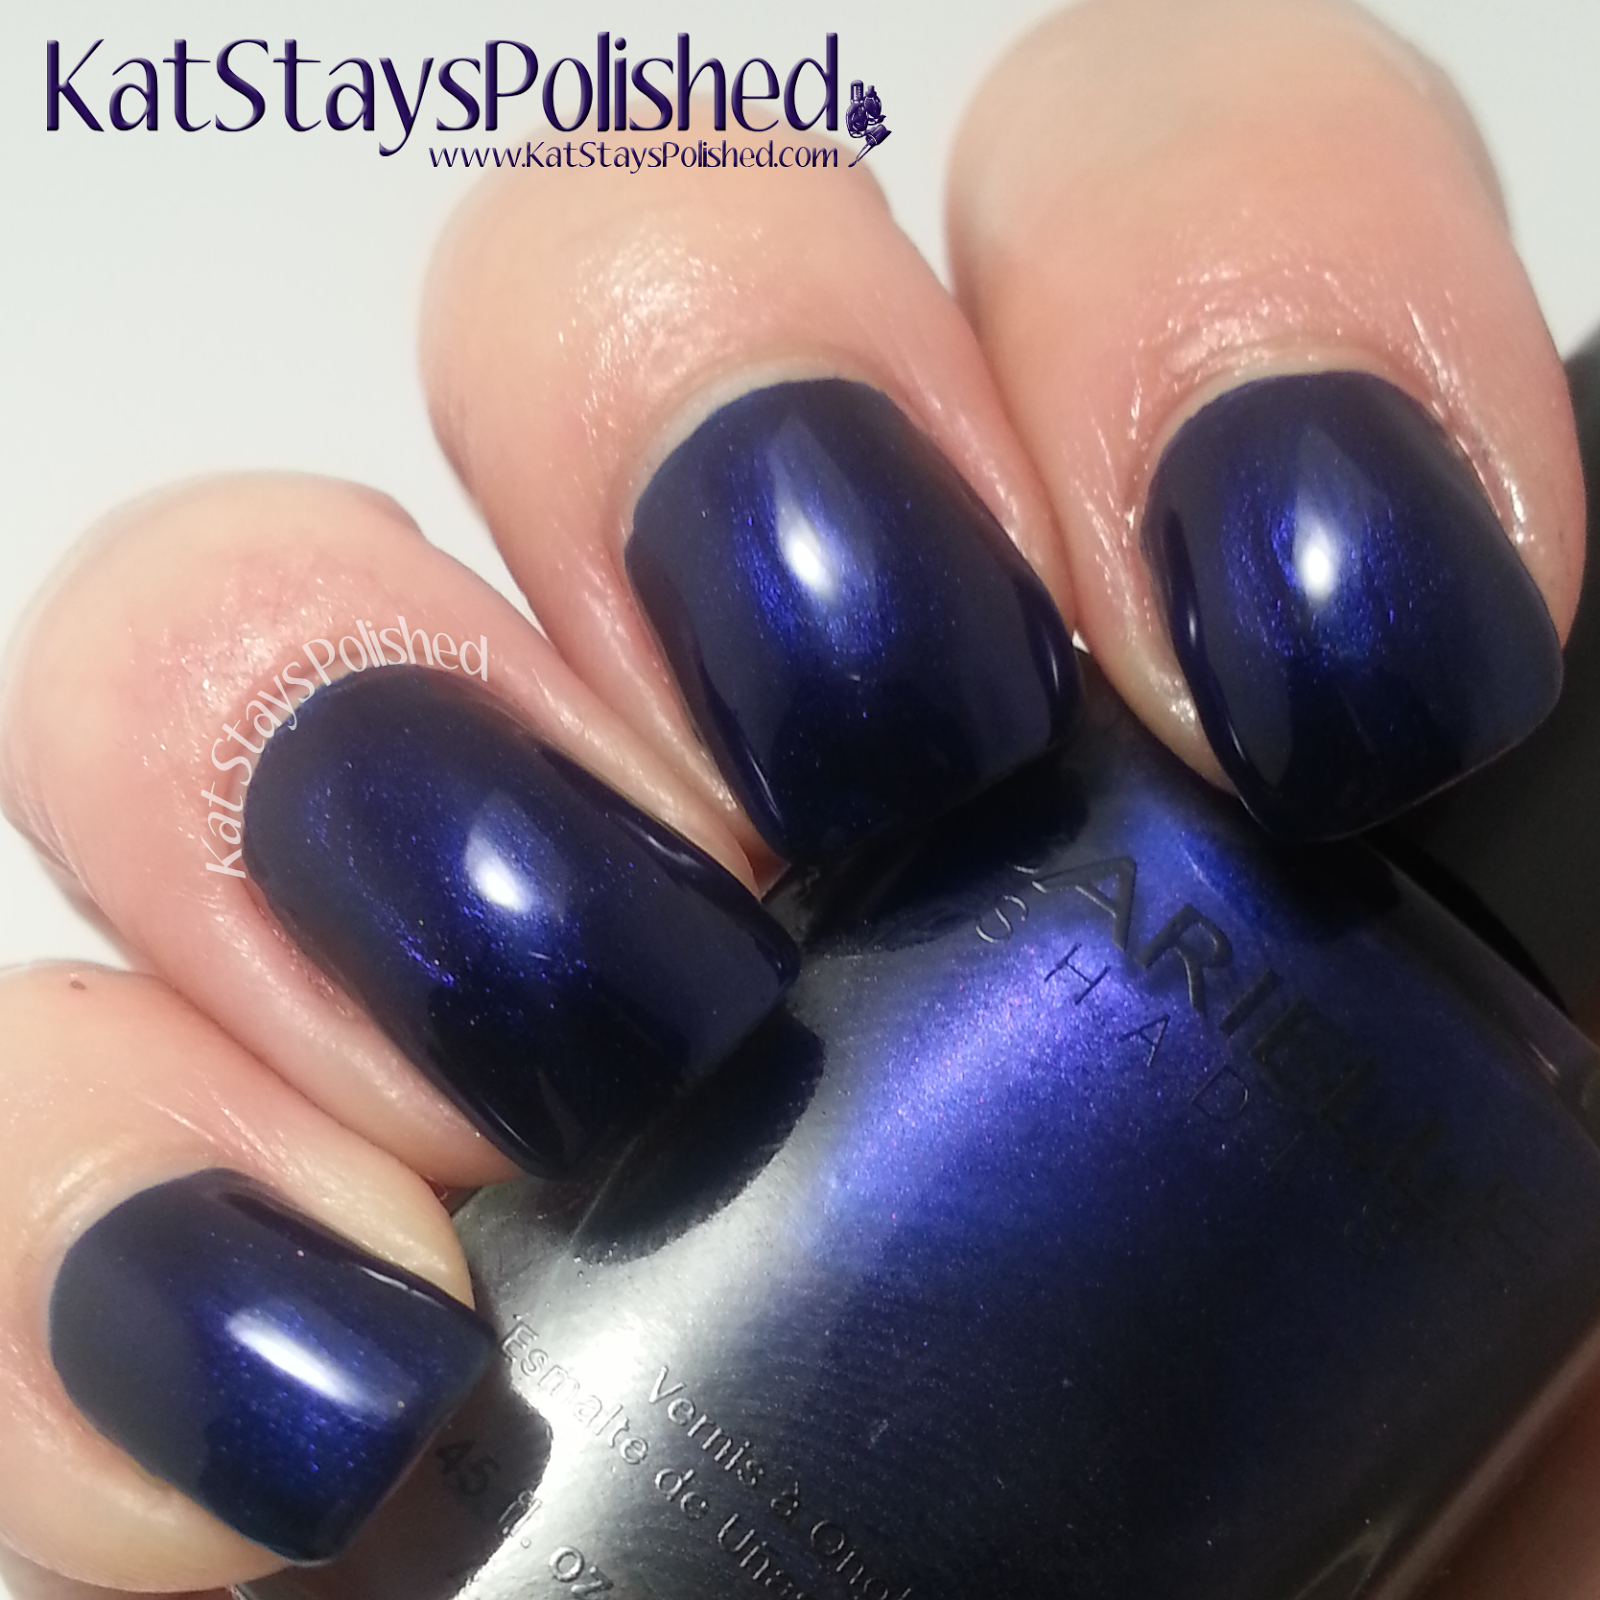 Barielle Jetsetter Collection - Midnight in Paris | Kat Stays Polished